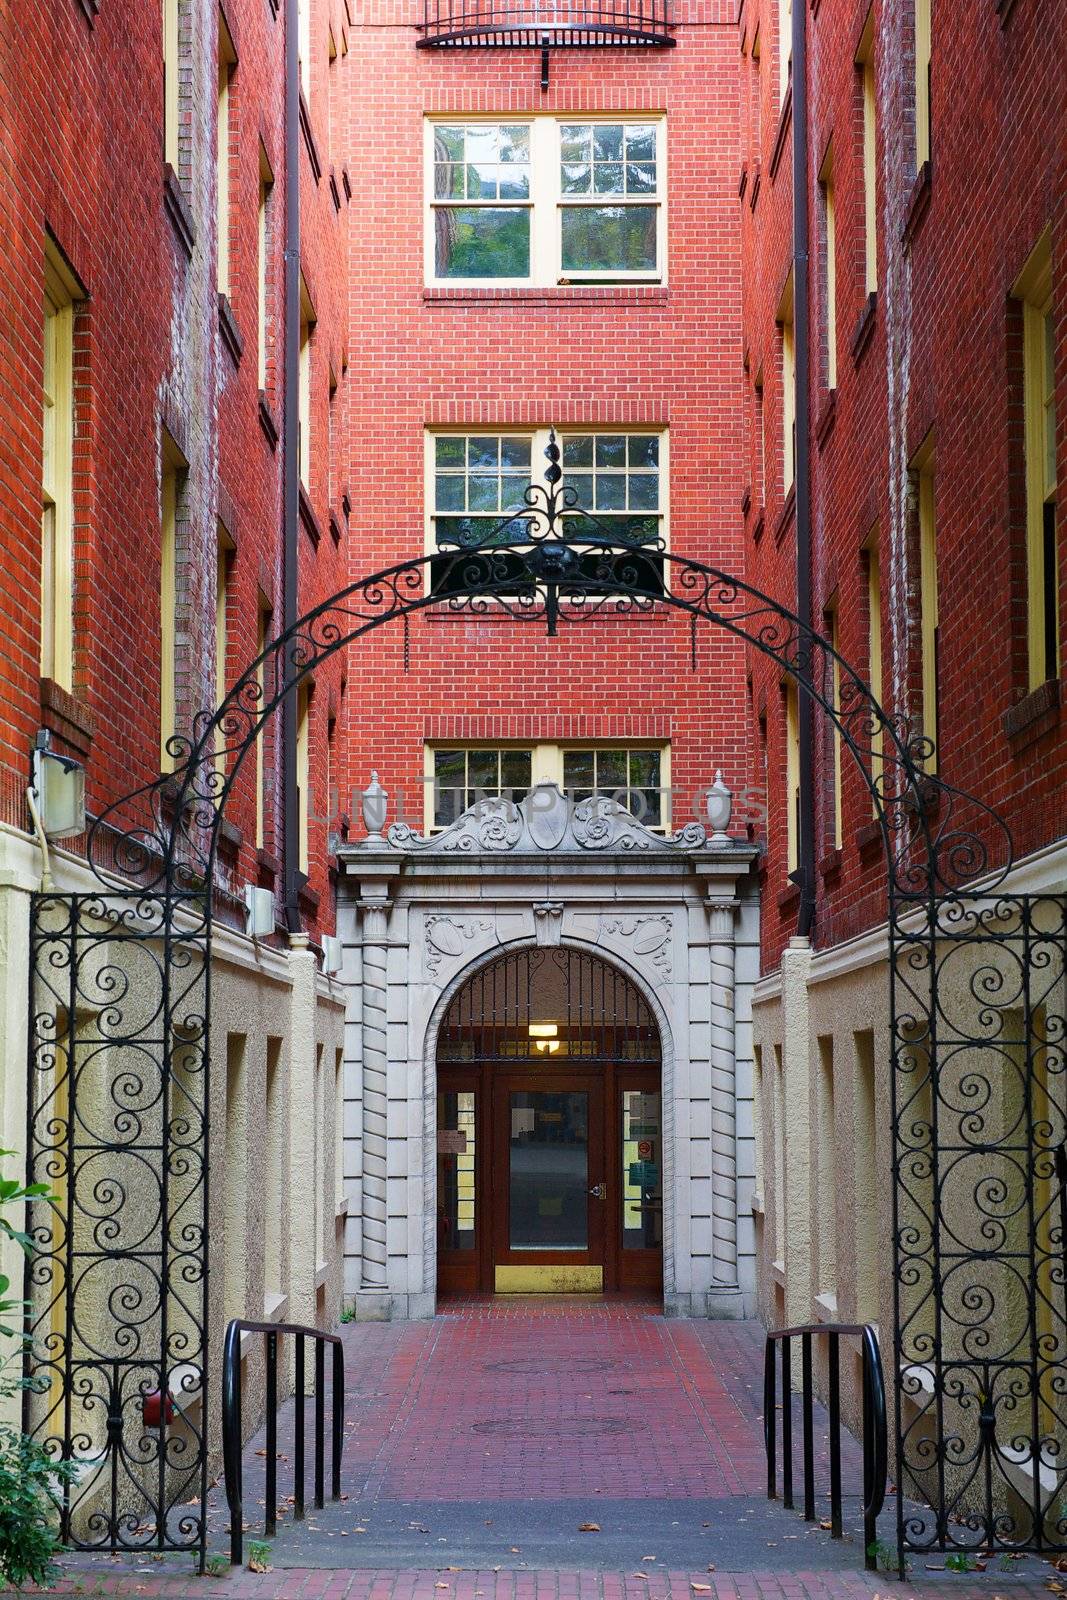 Hall leading to front door of an old brick apartment building with wrought iron entrance feature